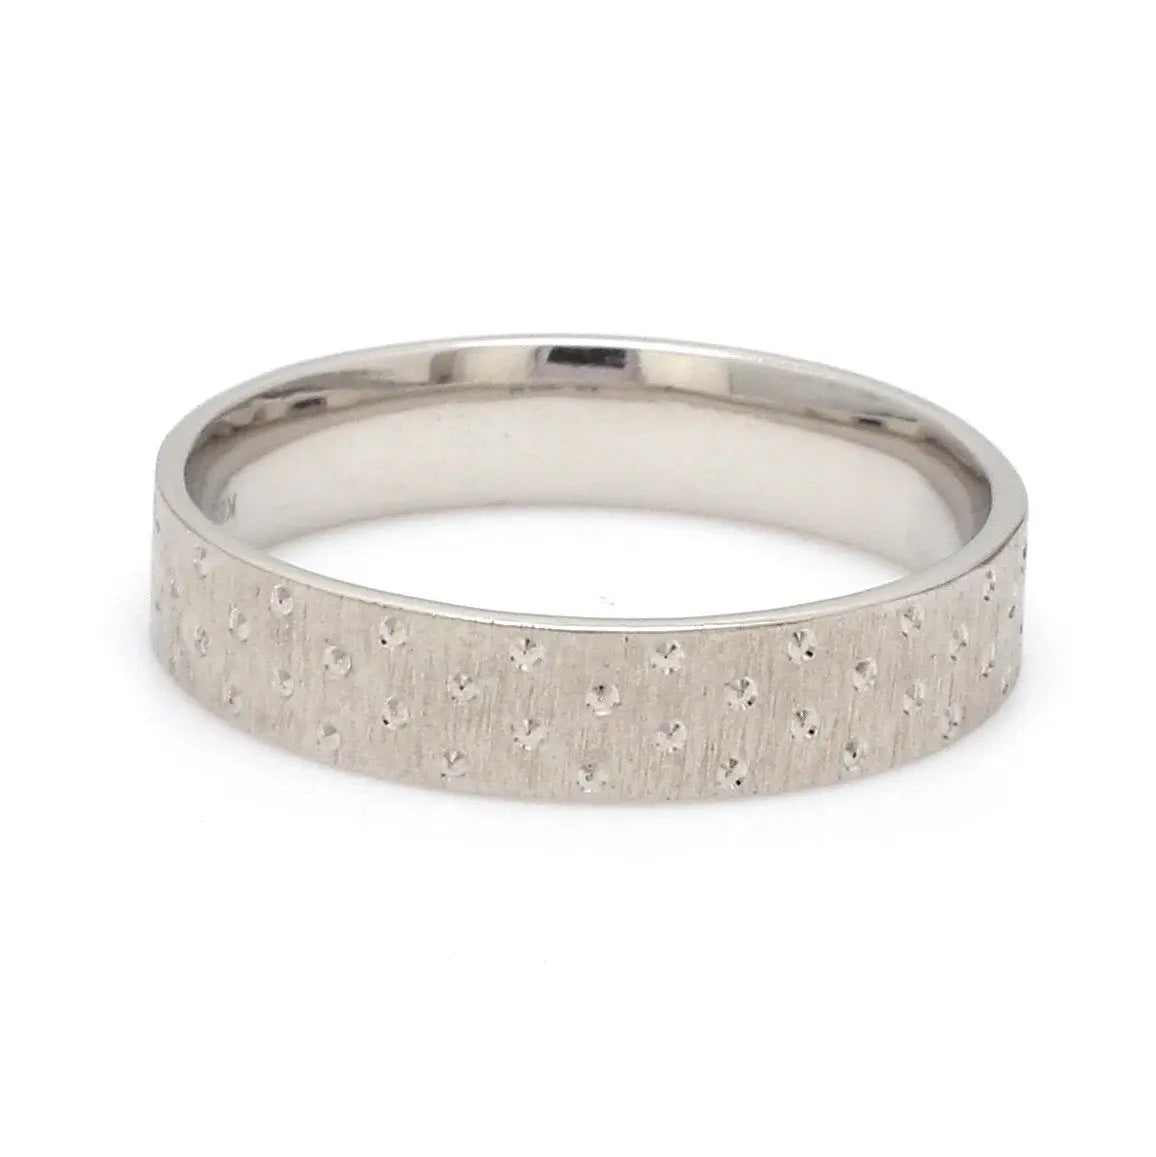 Japanese Platinum Love Bands with Dotted Texture JL PT 923   Jewelove.US